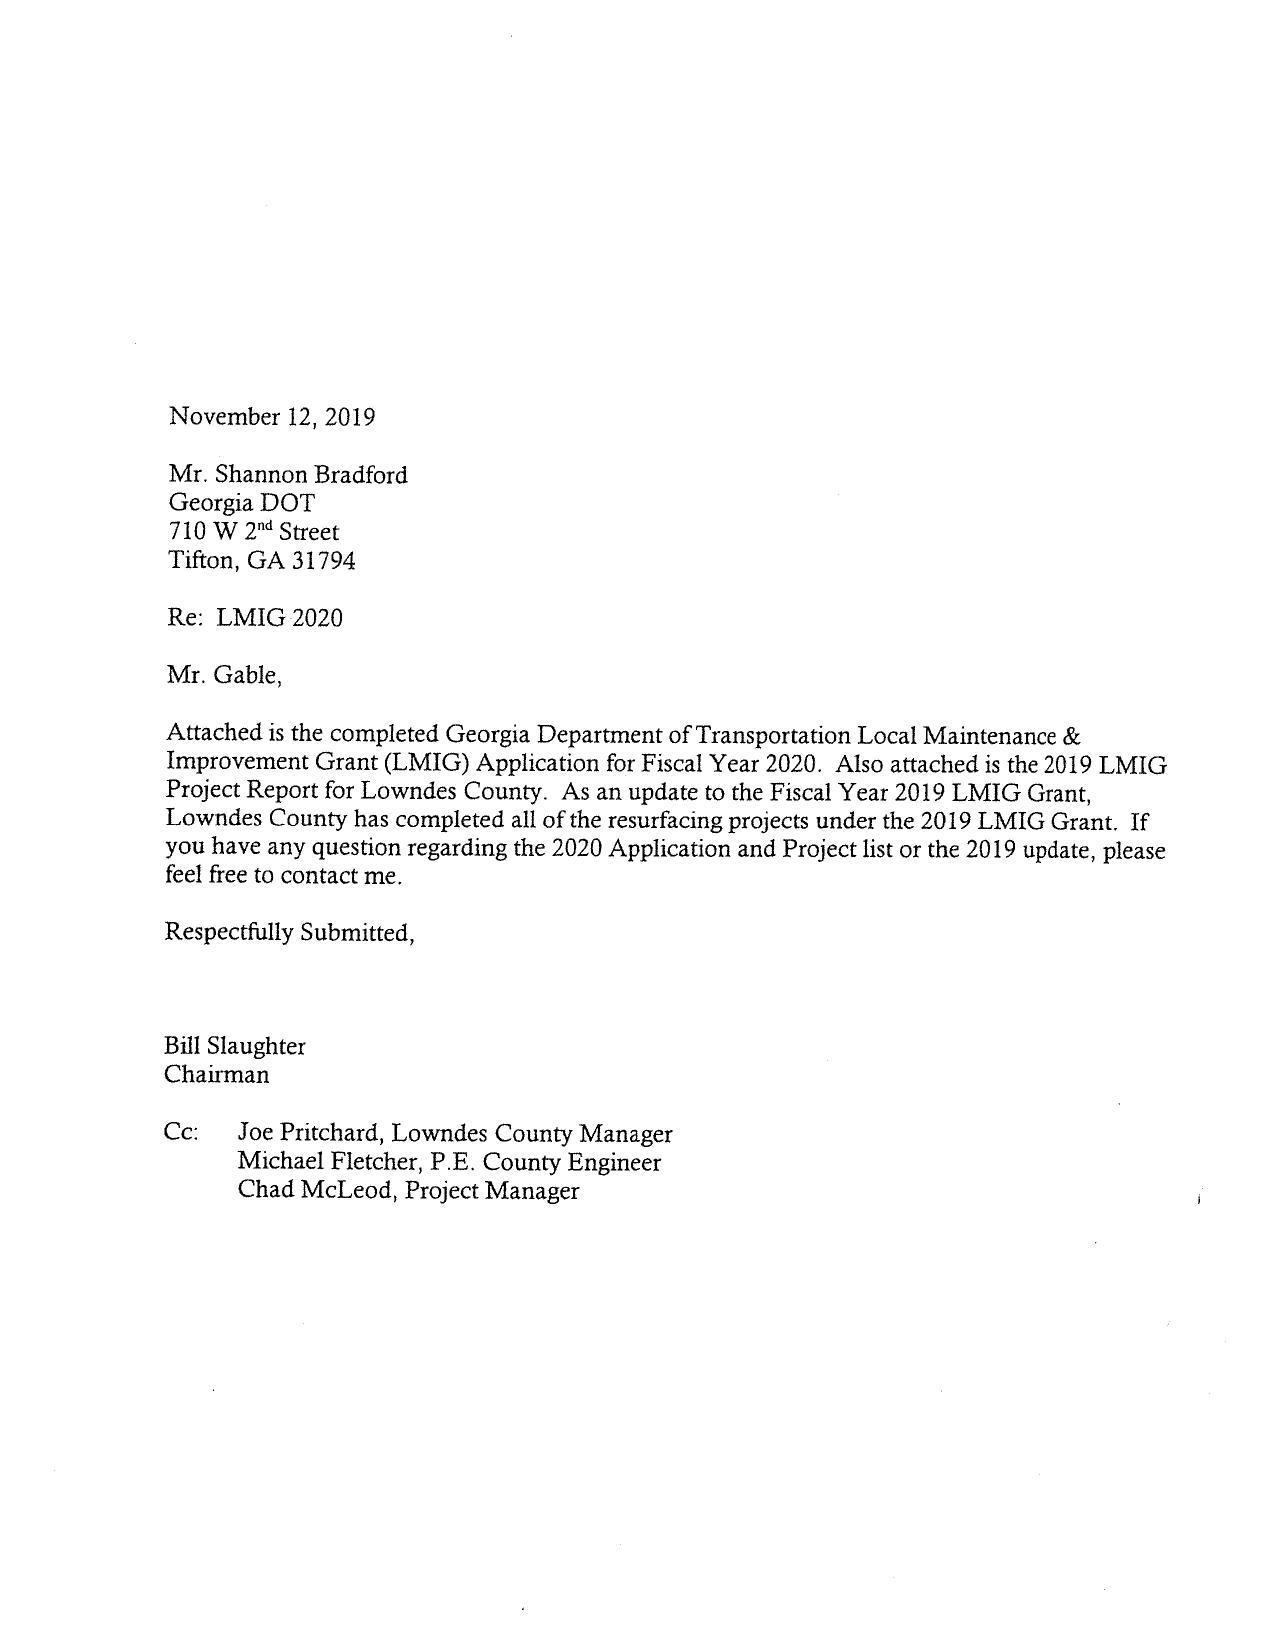 Request from County Chairman to GDOT for LMIG grant